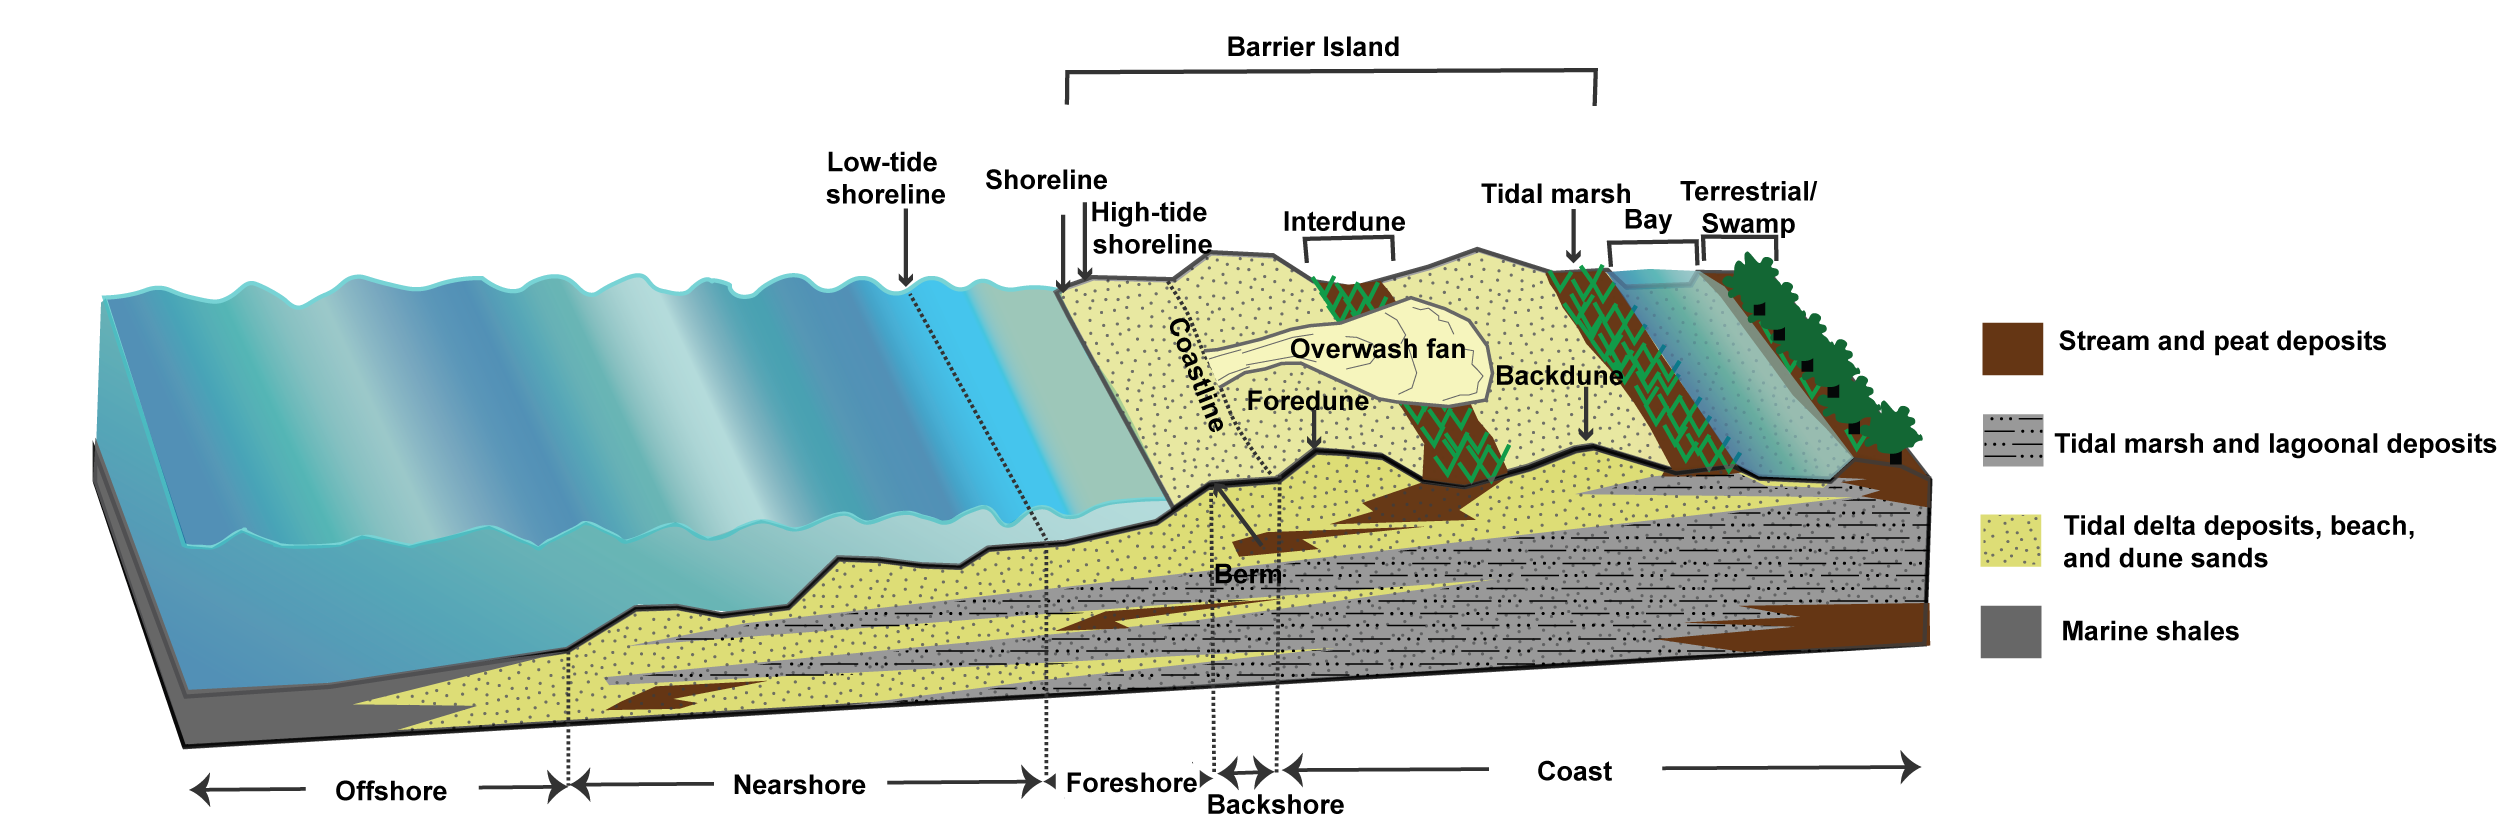 Coastal sedimentary environments and facies from offshore to beach and back bay.